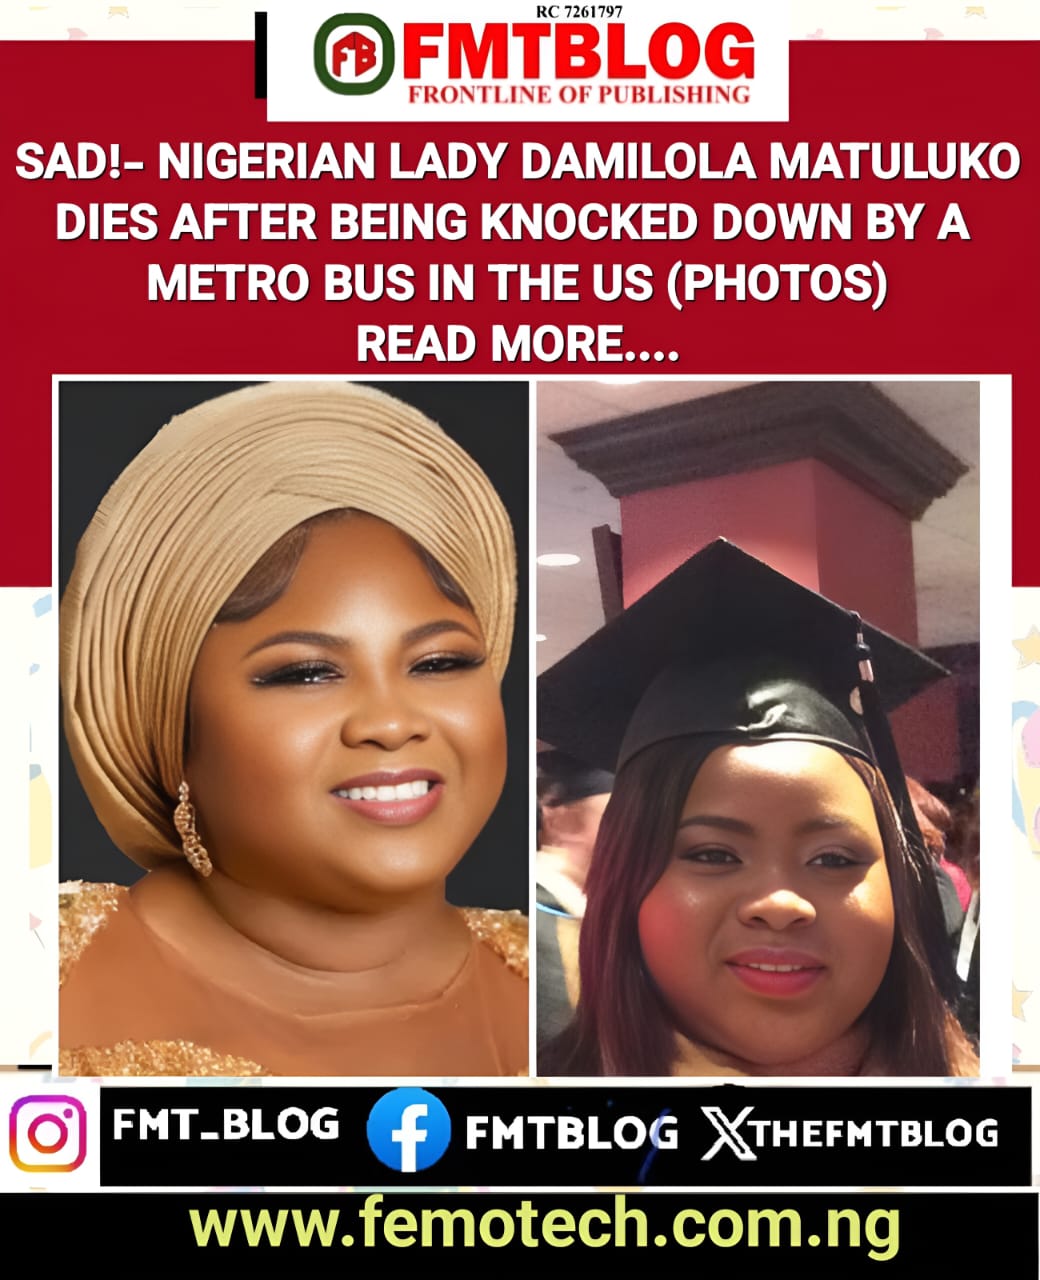 Sad!- Nigerian Lady Damilola Matuluko Dies After Being Knocked Down By A Metro Bus In The US (PHOTOS)